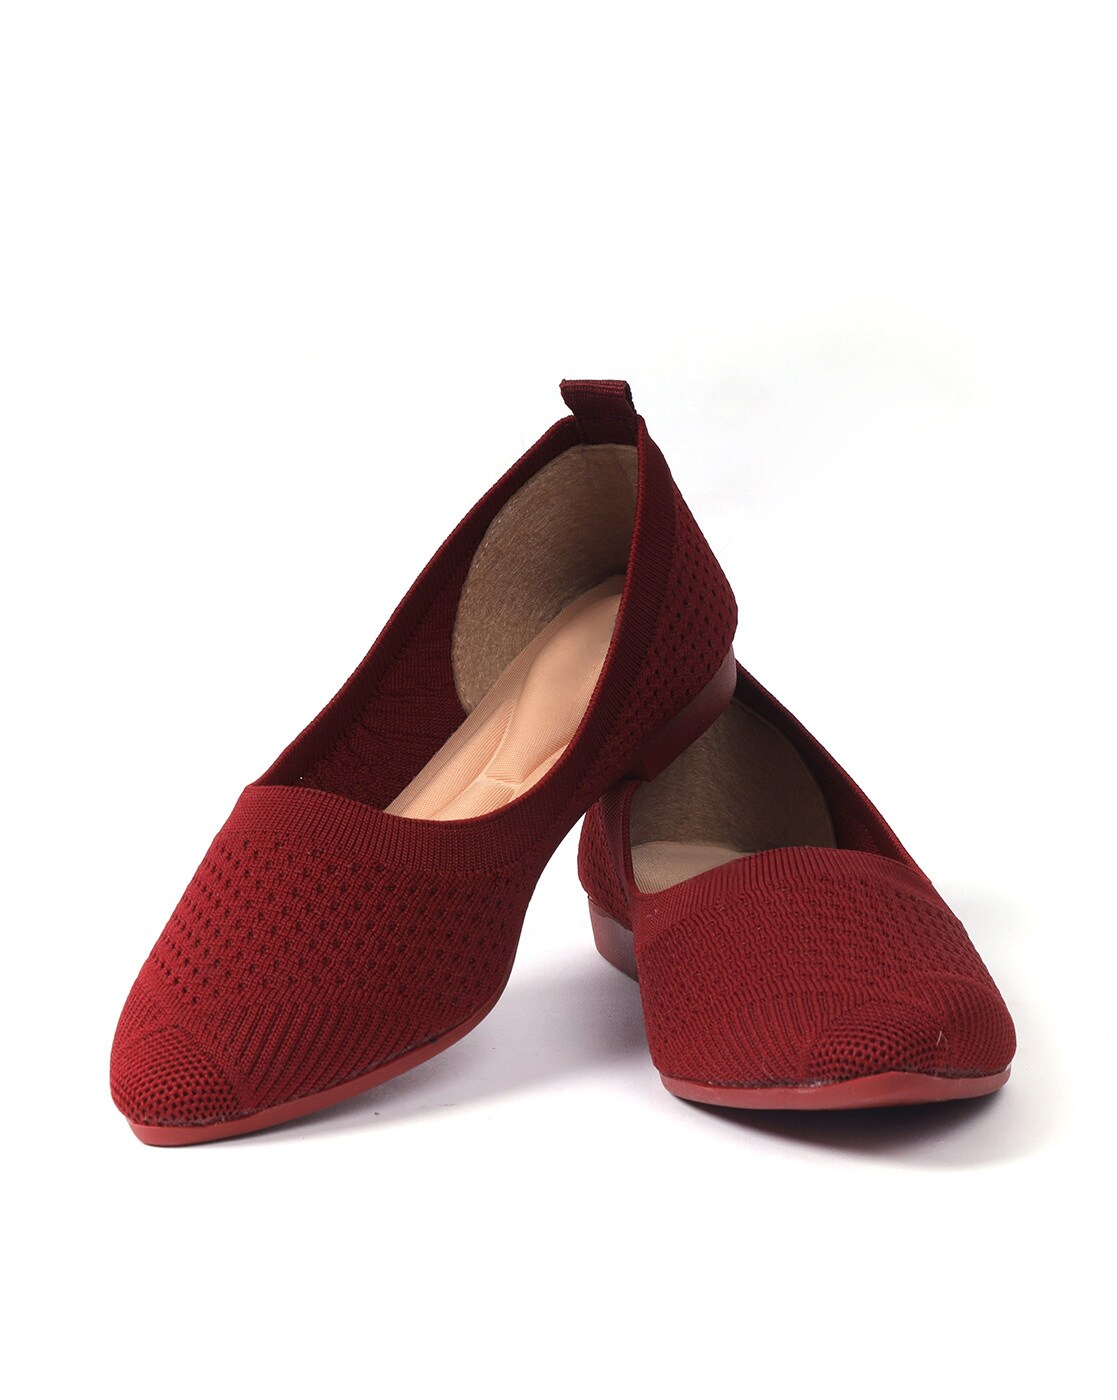 What color of shoe should I wear with a burgundy dress? - Quora